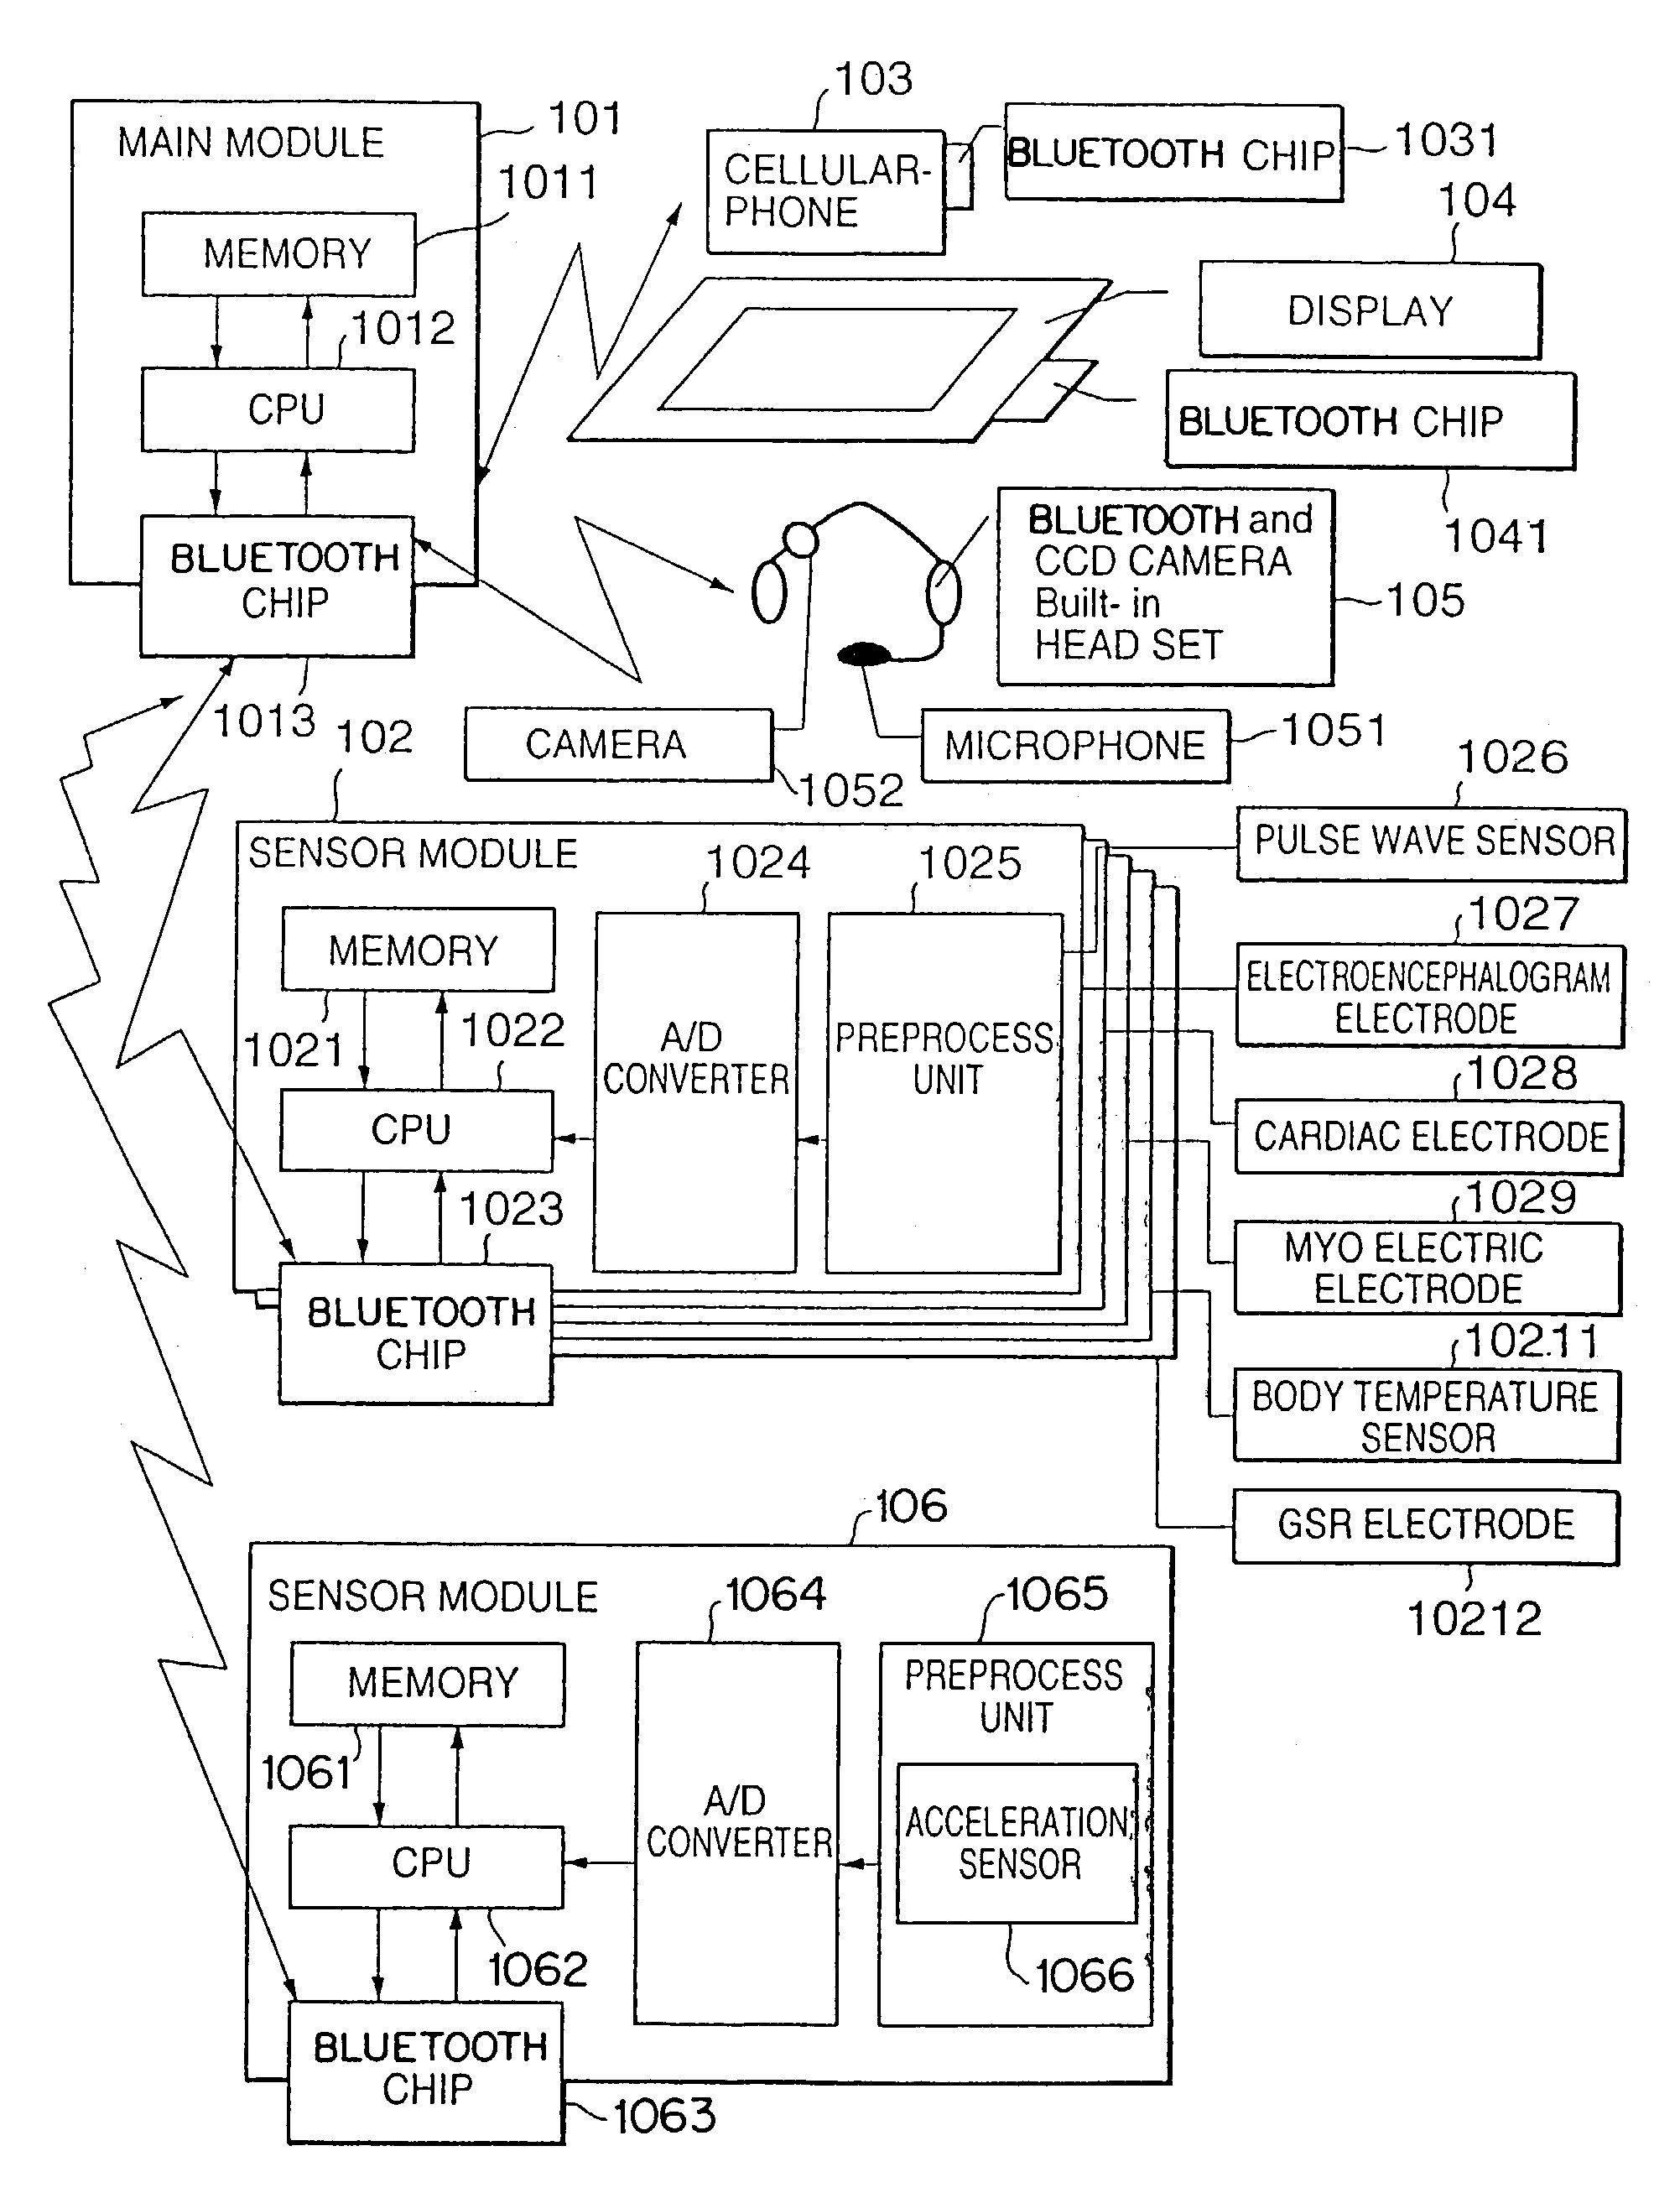 Wearable life support apparatus and method